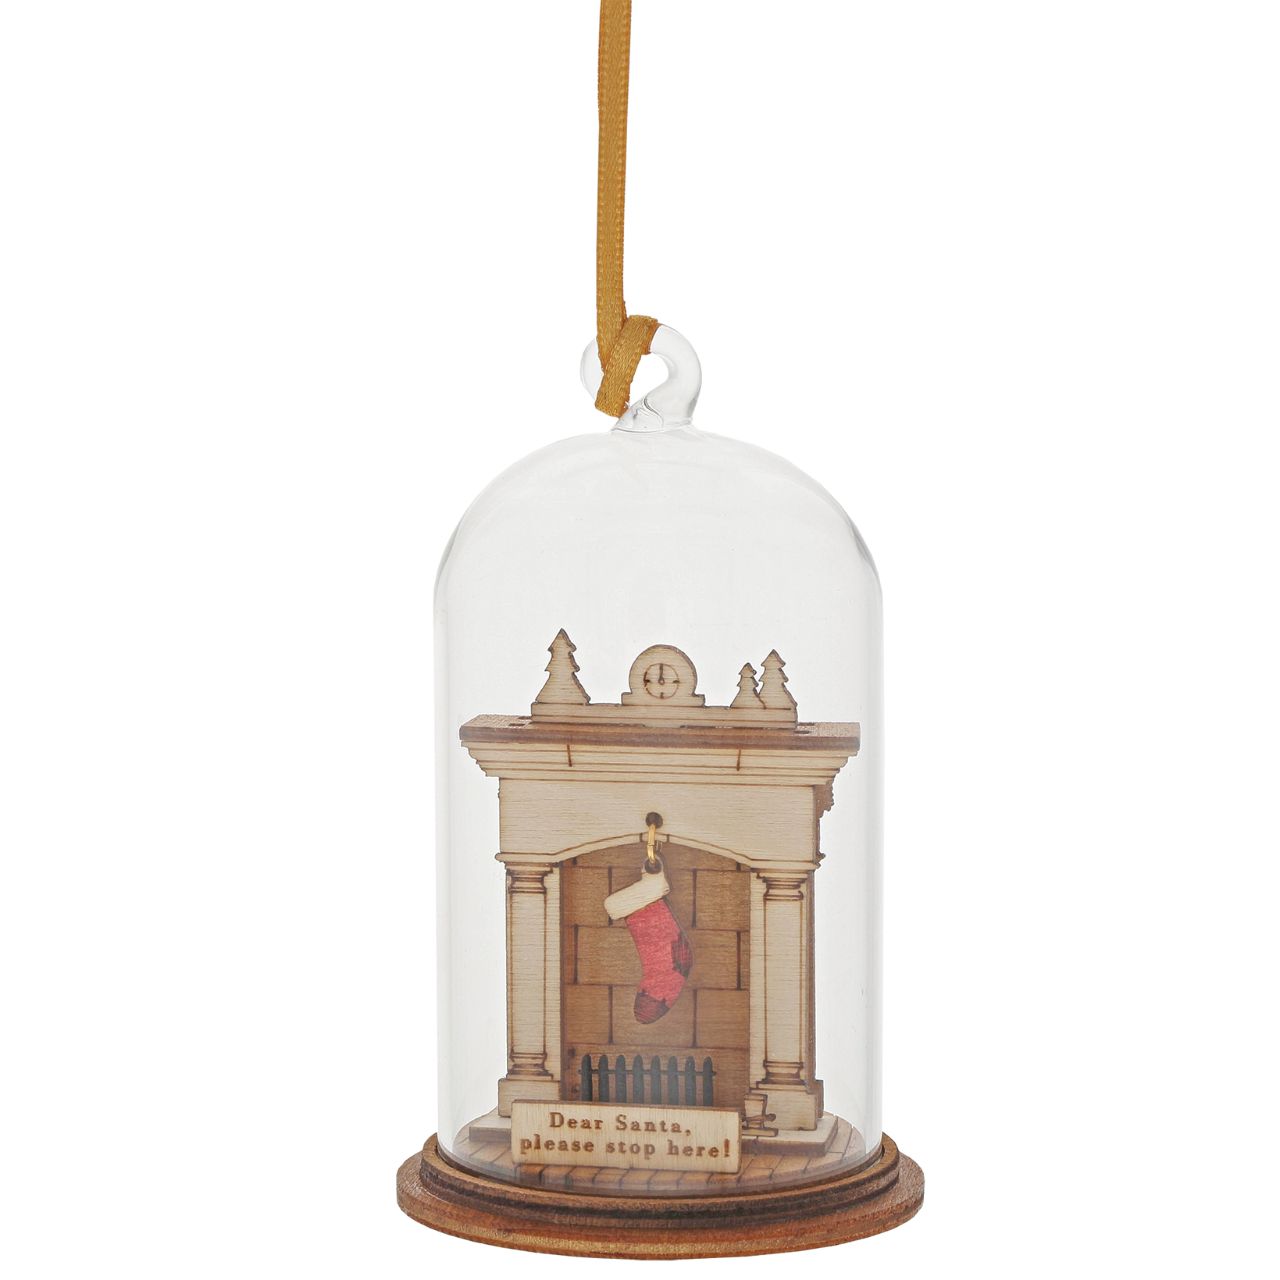 Santa Please Stop Here Hanging Ornament  The Spirit of Christmas. A collection of delightful wooden decorations that capture the essence of that special time of year. This glass dome, Christmas decoration encases a magical fireplace, adorned with a colourful stocking, ready for santa and ribbon to help hang off your Christmas tree.